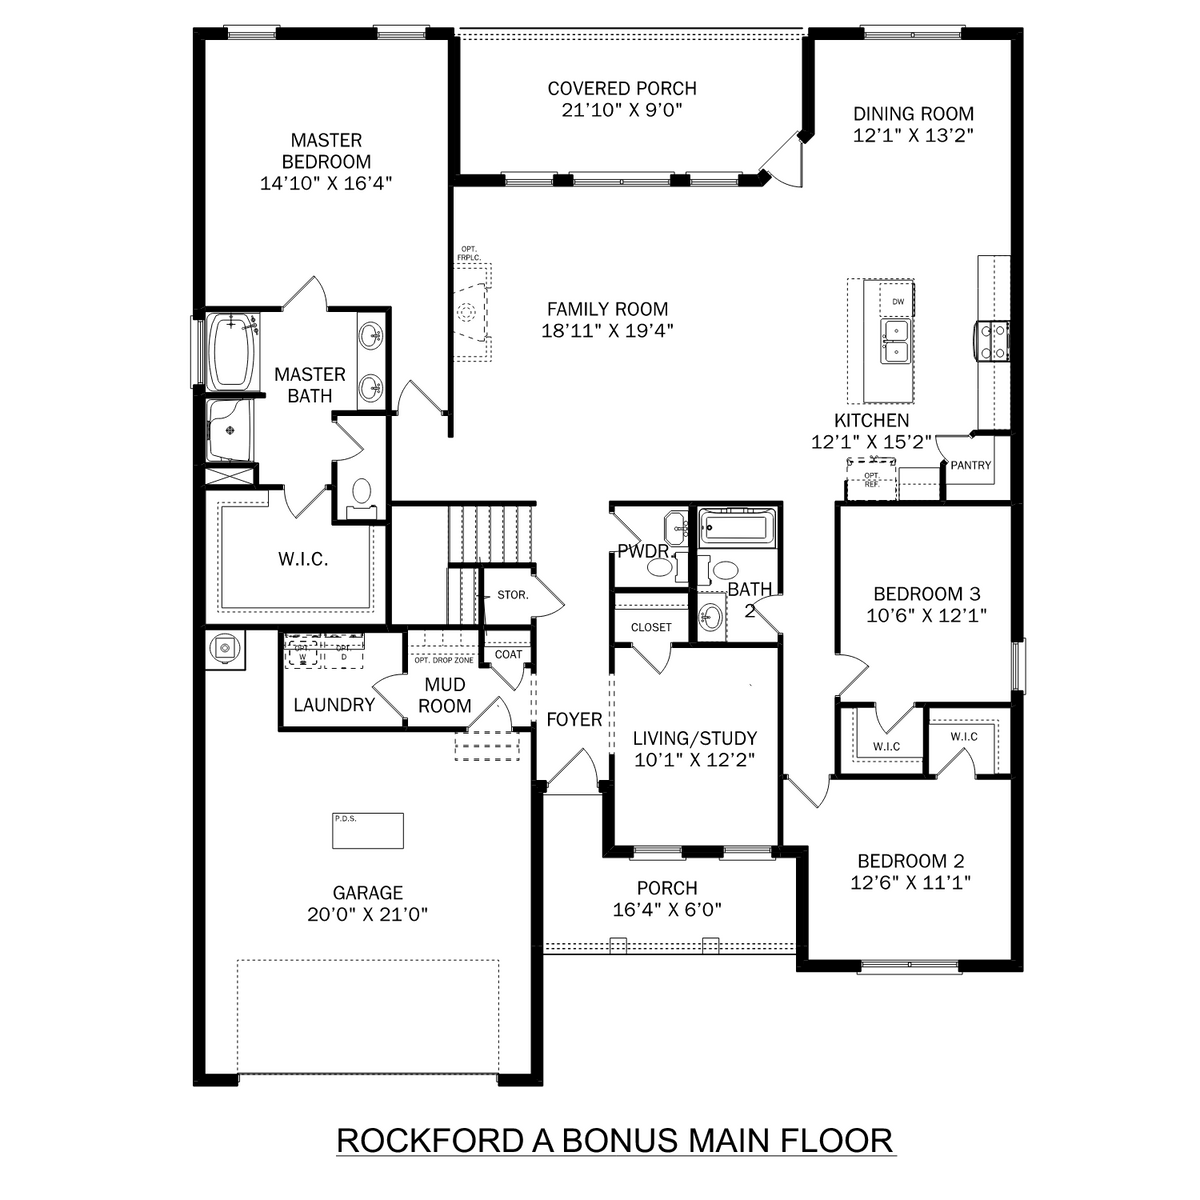 1 - The Rockford with Bonus buildable floor plan layout in Davidson Homes' River Road Estates community.